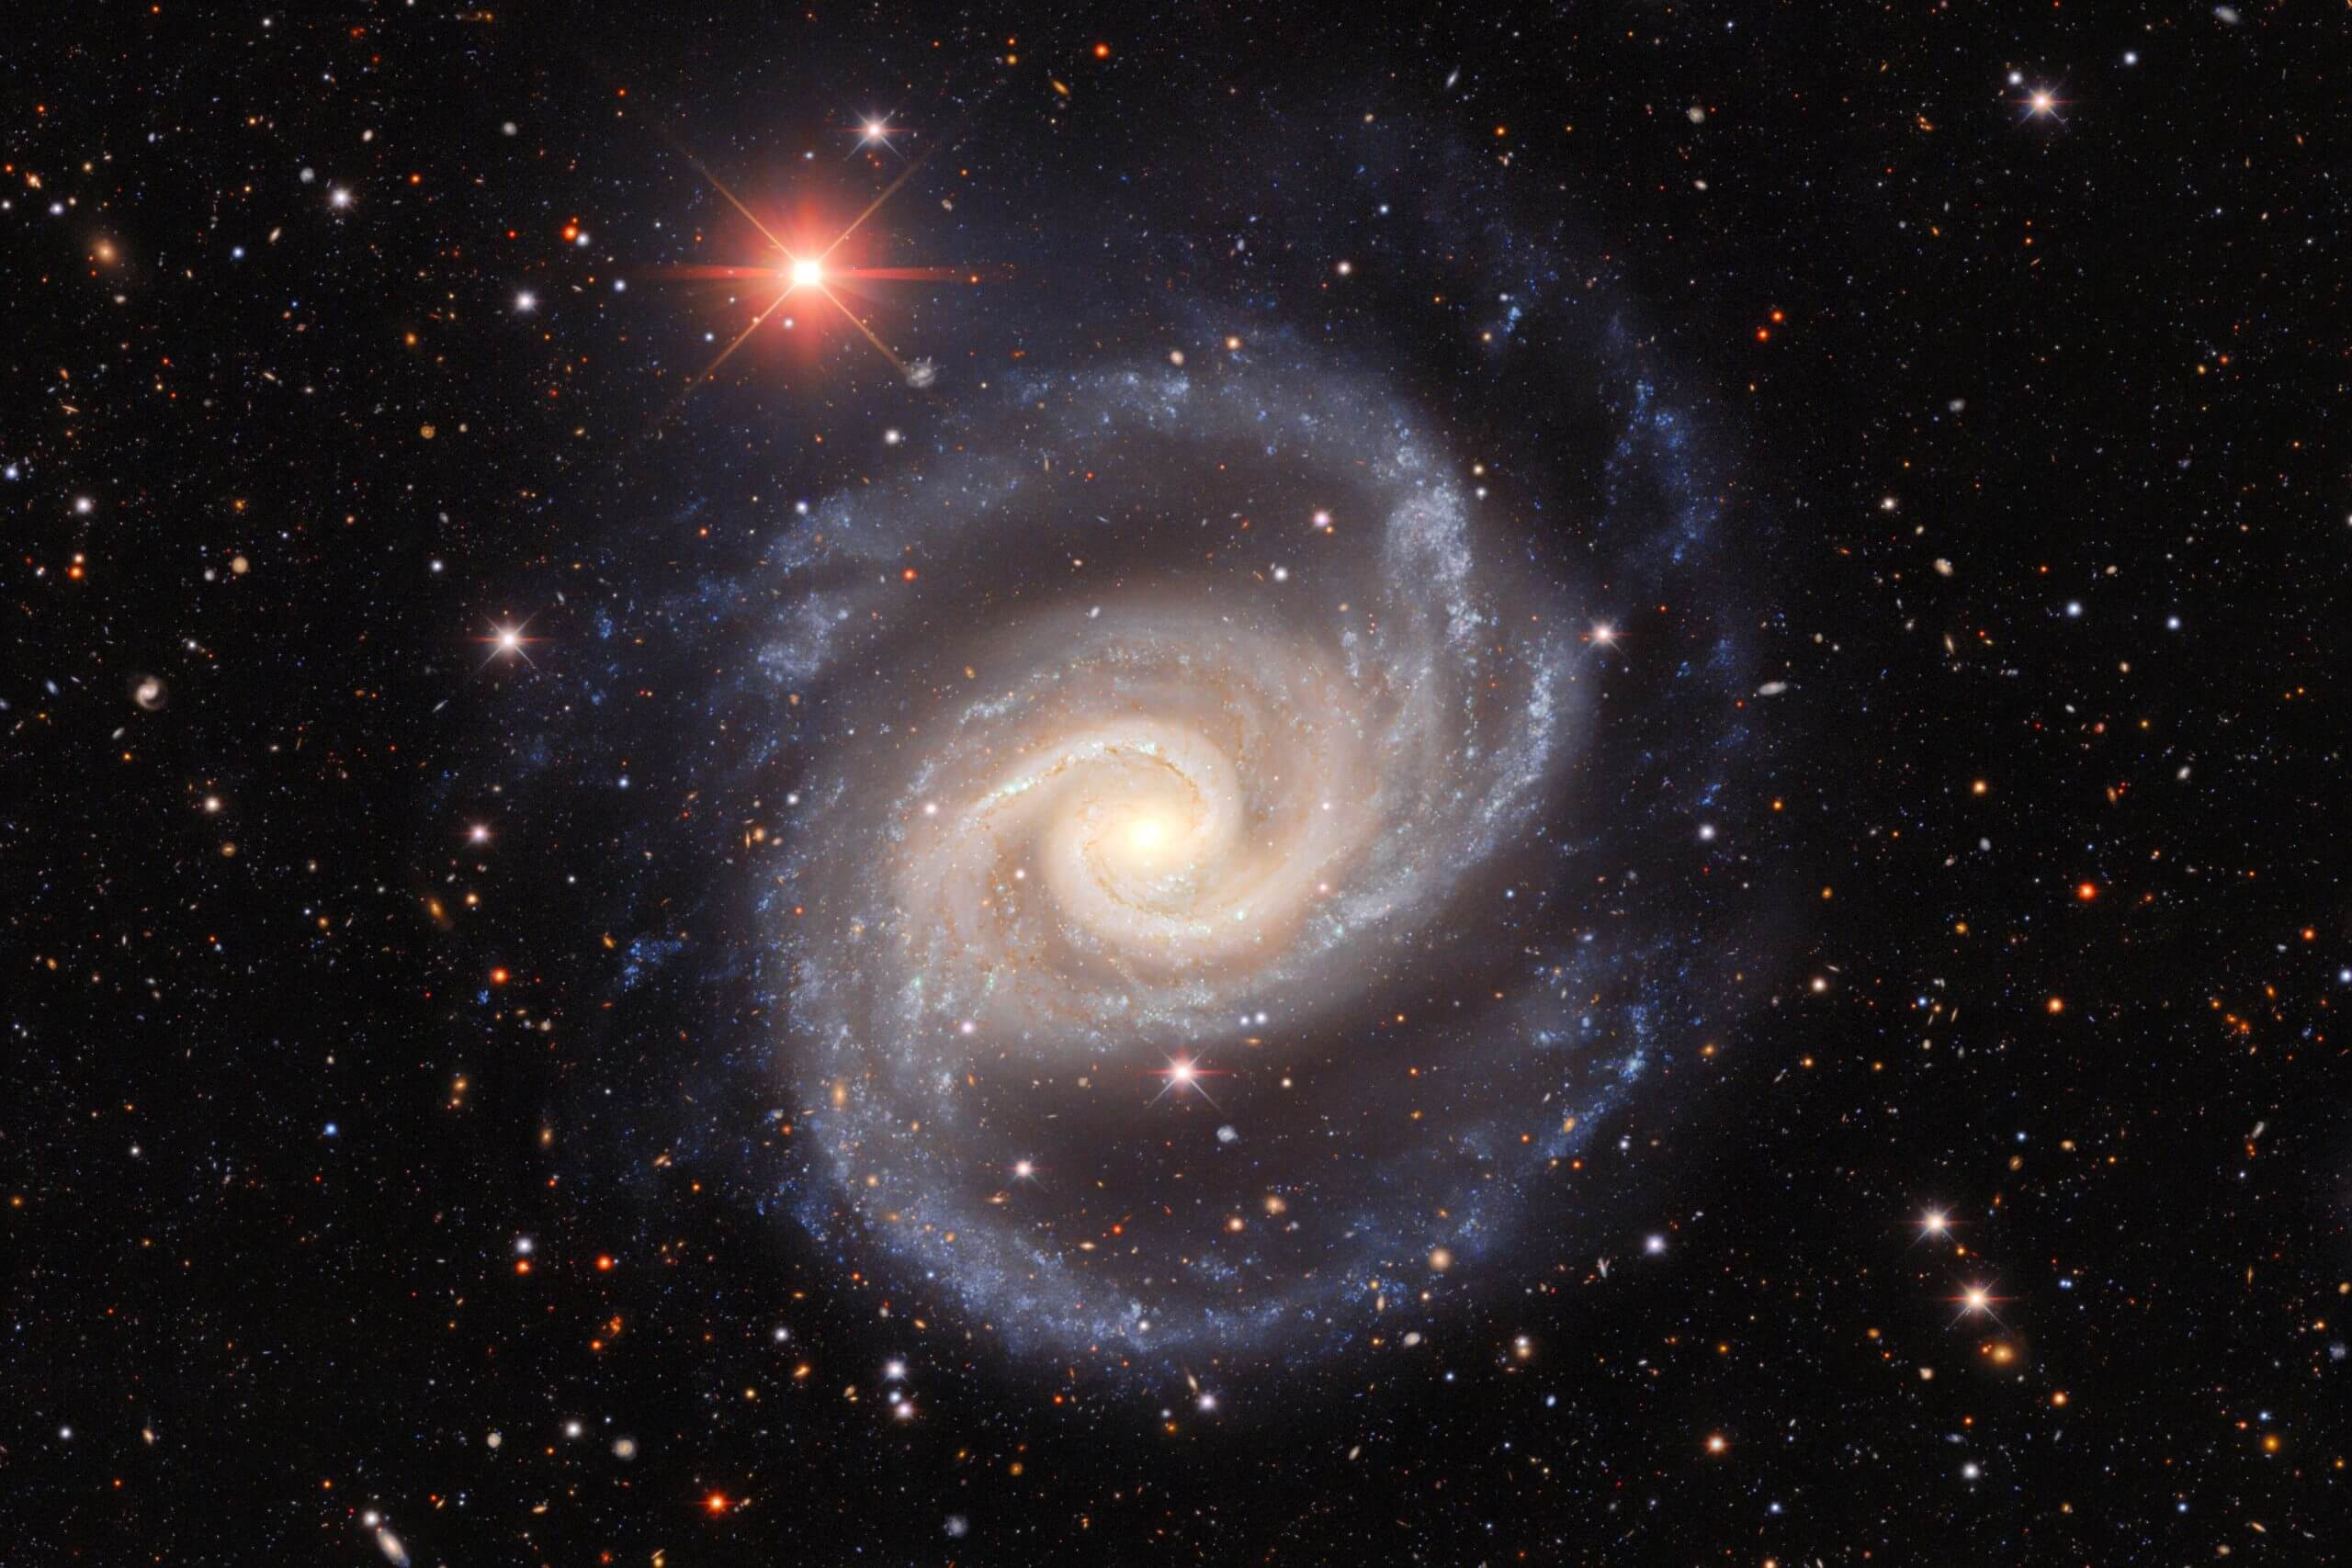 This image, taken by astronomers using the dark energy camera on the 4-meter Victor M. Blanco at the Cerro Tulolo Inter-American Observatory captures the galaxy NGC 1566 as it spins and throws its arms through space. The spiral galaxy whose popular name is the Spanish Dancer is often studied by astronomers who study galaxy groups, stars of different ages and galactic black holes. Credit: Dark Energy Survey/DOE/FNAL/DECam/CTIO/NOIRLab/NSF/AURA